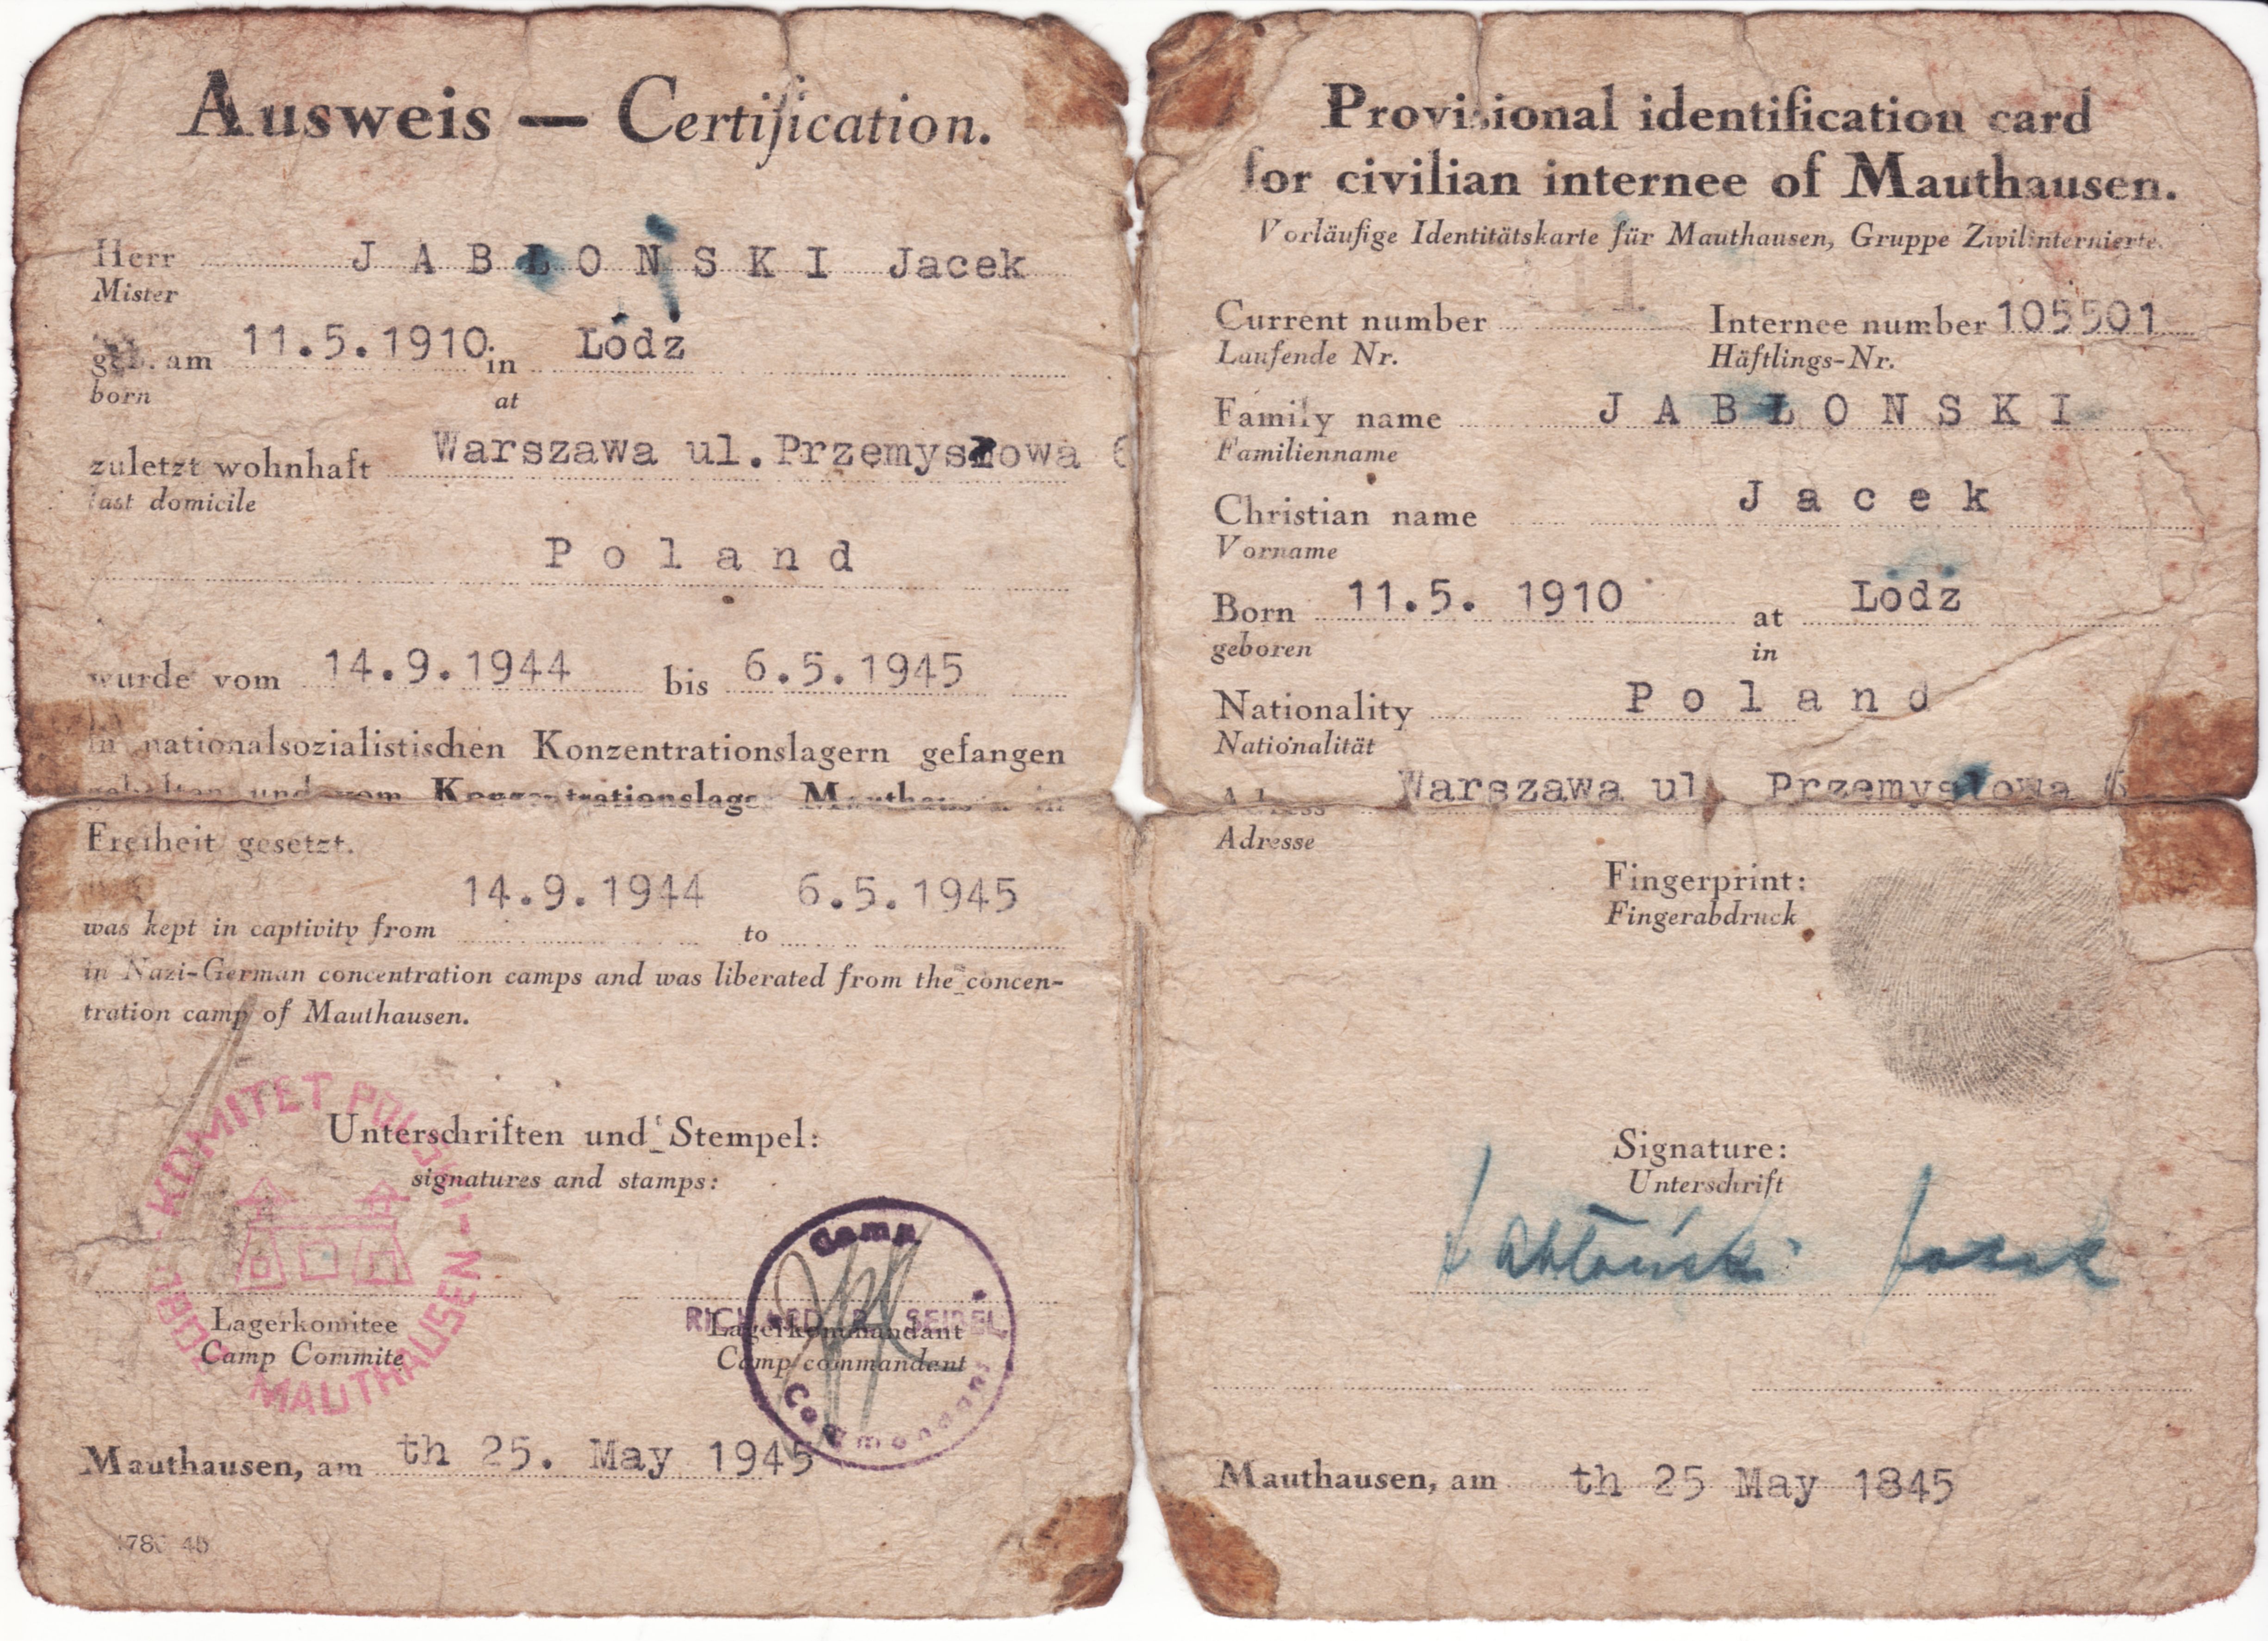 Post-liberation identification paper of former Mauthausen-Gusen Concentration Camp prisoner Jacek Jablonski, issued by the US Army on 25 May 1945